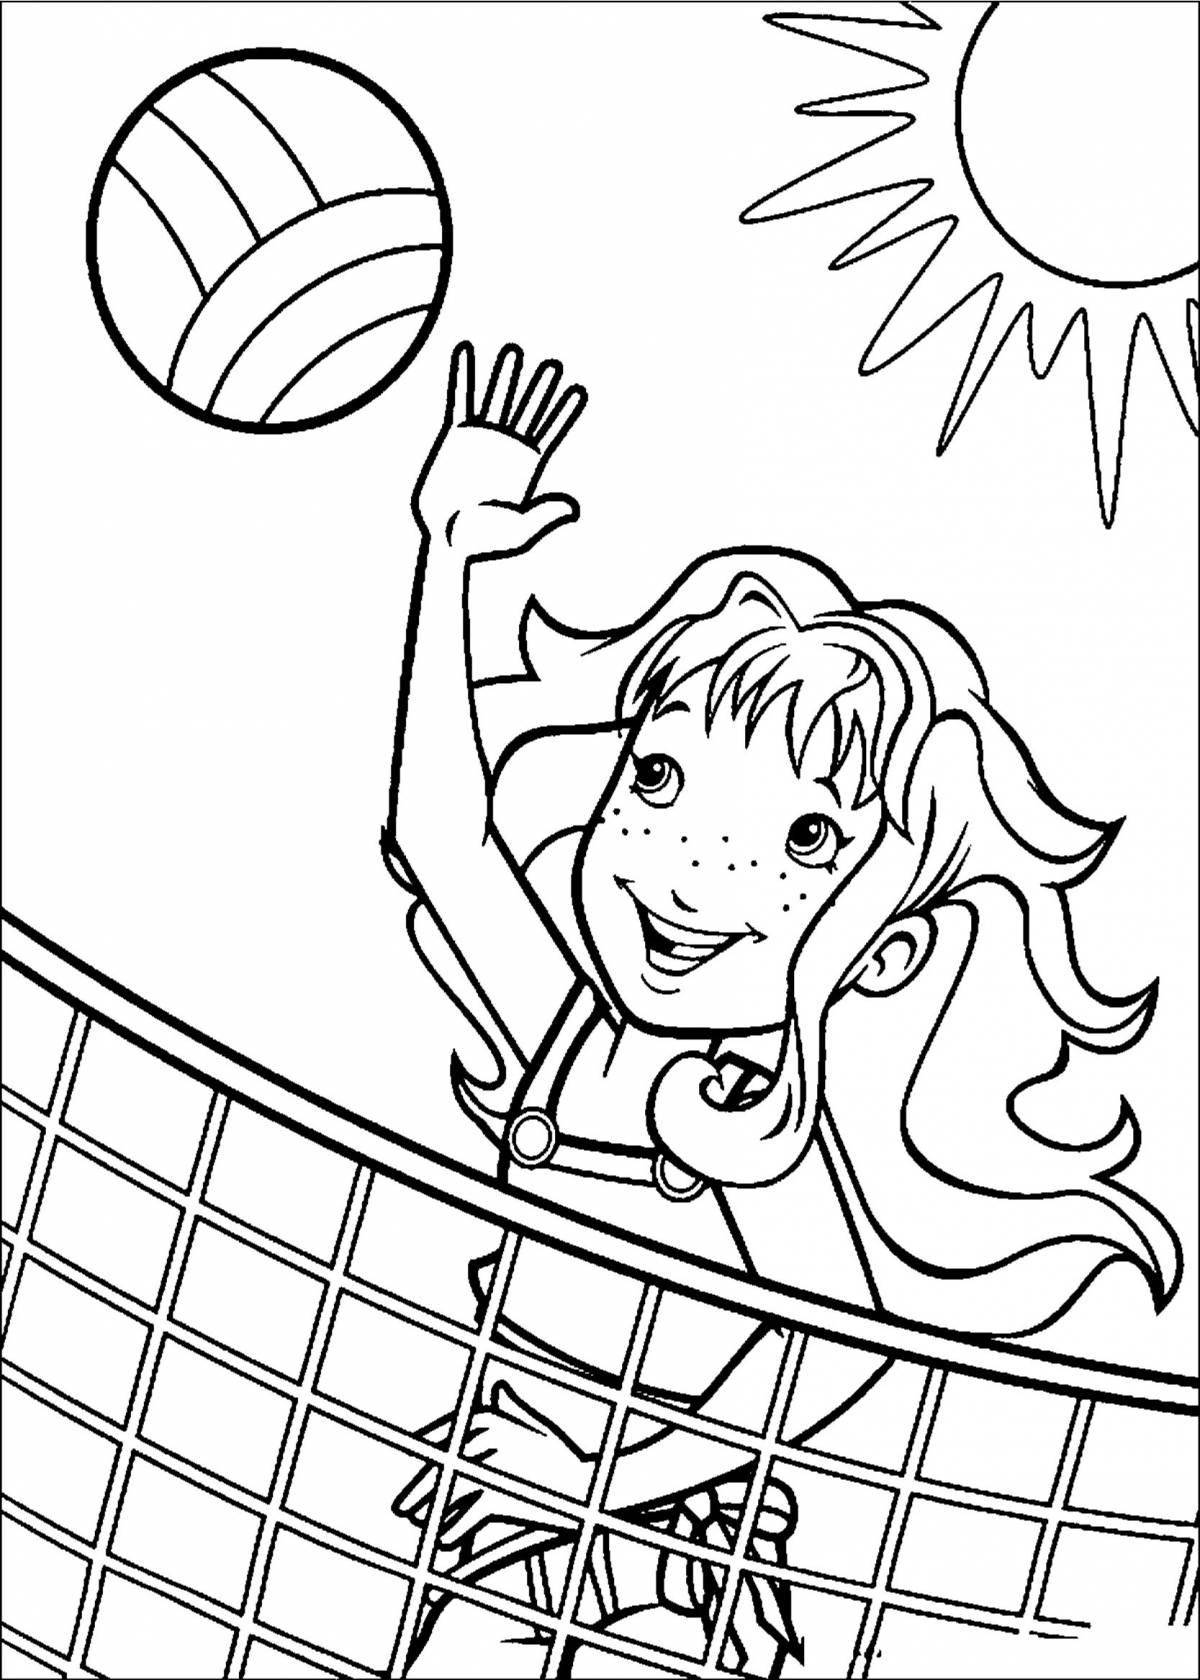 Colorful volleyball coloring book for the whole family